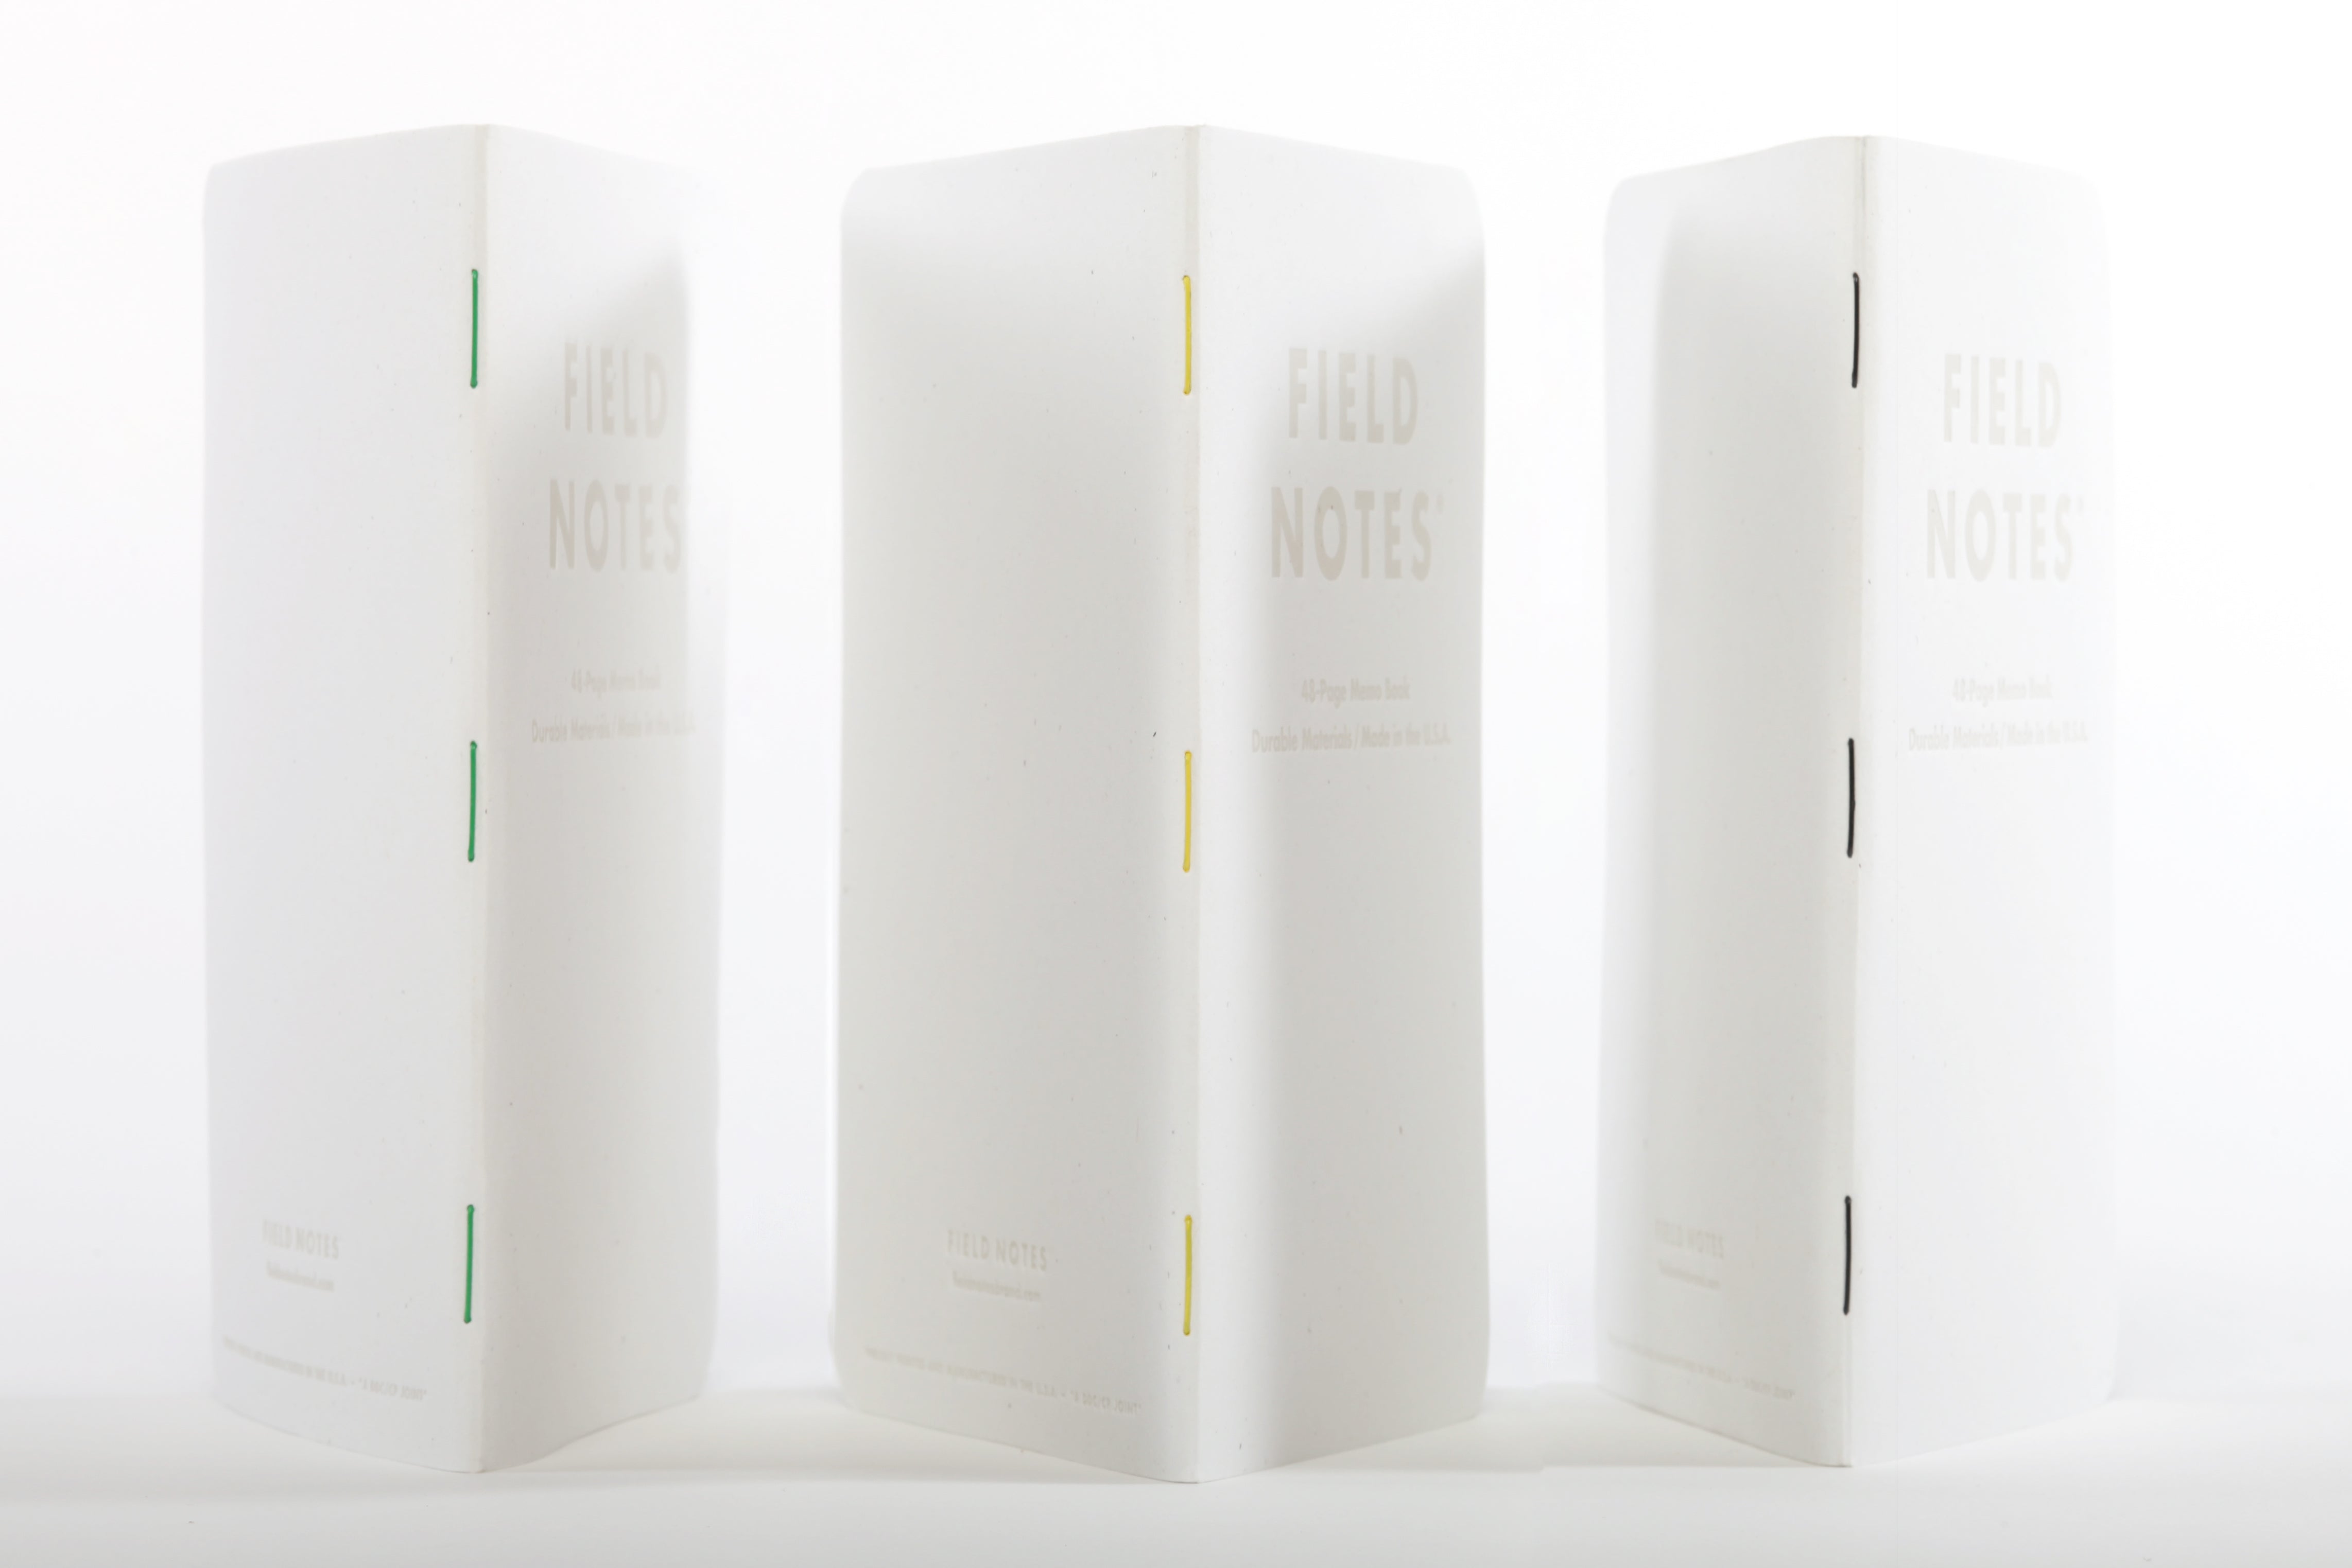 Field Notes Birch Bark Edition 3-Pack